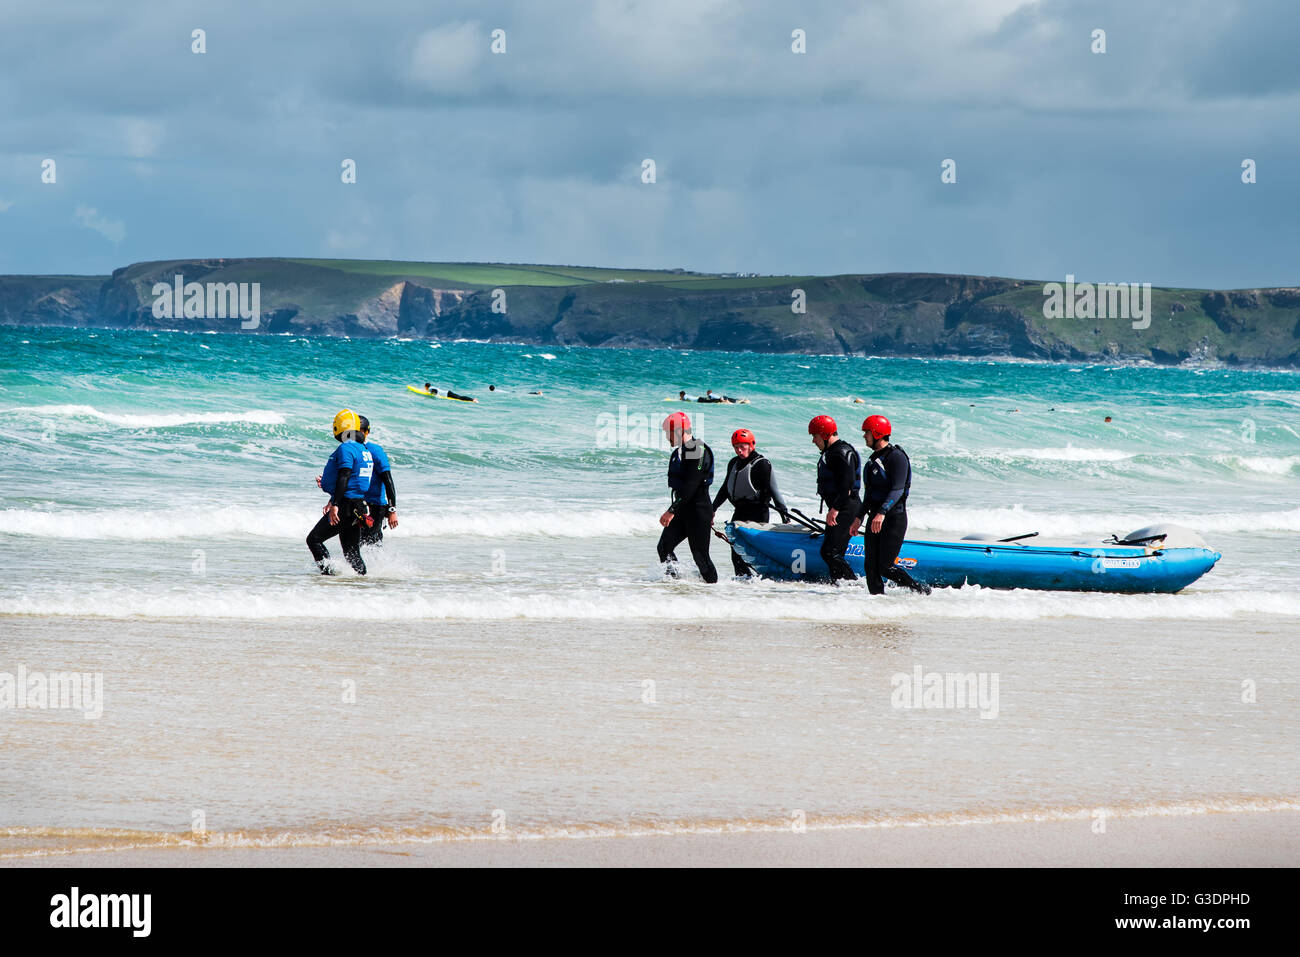 Sea rafting is a growing sports activity in Newquay, Cornwall, UK. Stock Photo